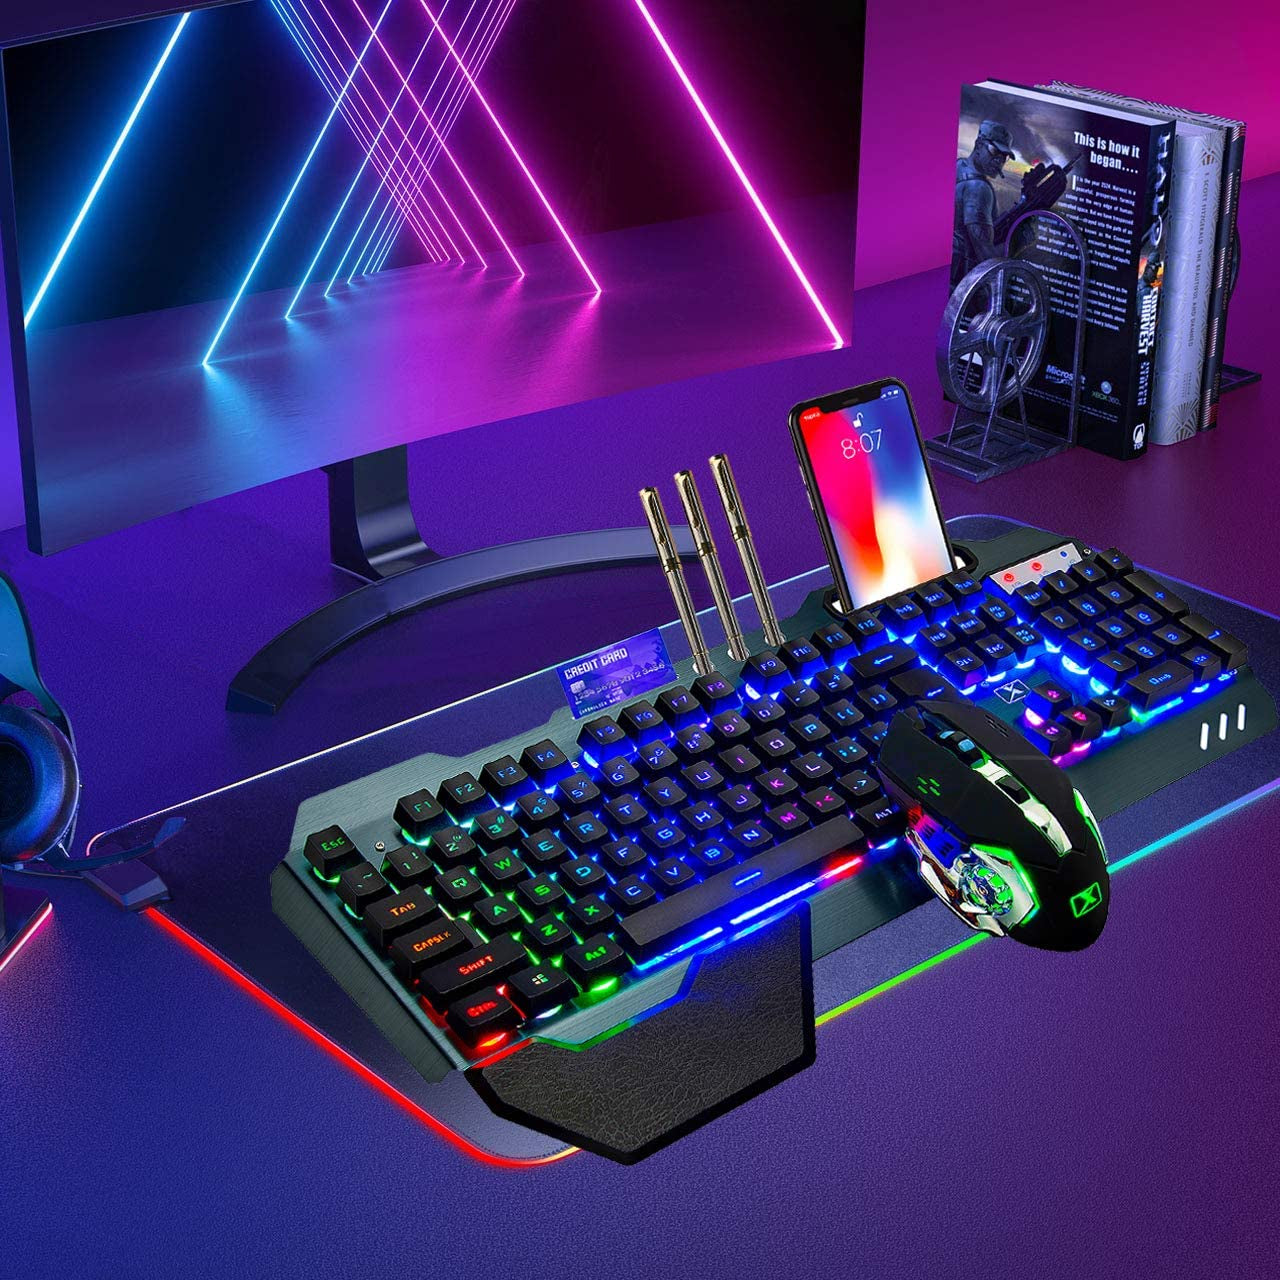 Wireless Gaming Keyboard and Mouse,Rainbow Backlit Rechargeable Keyboard Mouse with 3800Mah Battery Metal Panel,Removable Hand Rest Mechanical Feel Keyboard and 7 Color Gaming Mute Mouse for PC Gamers